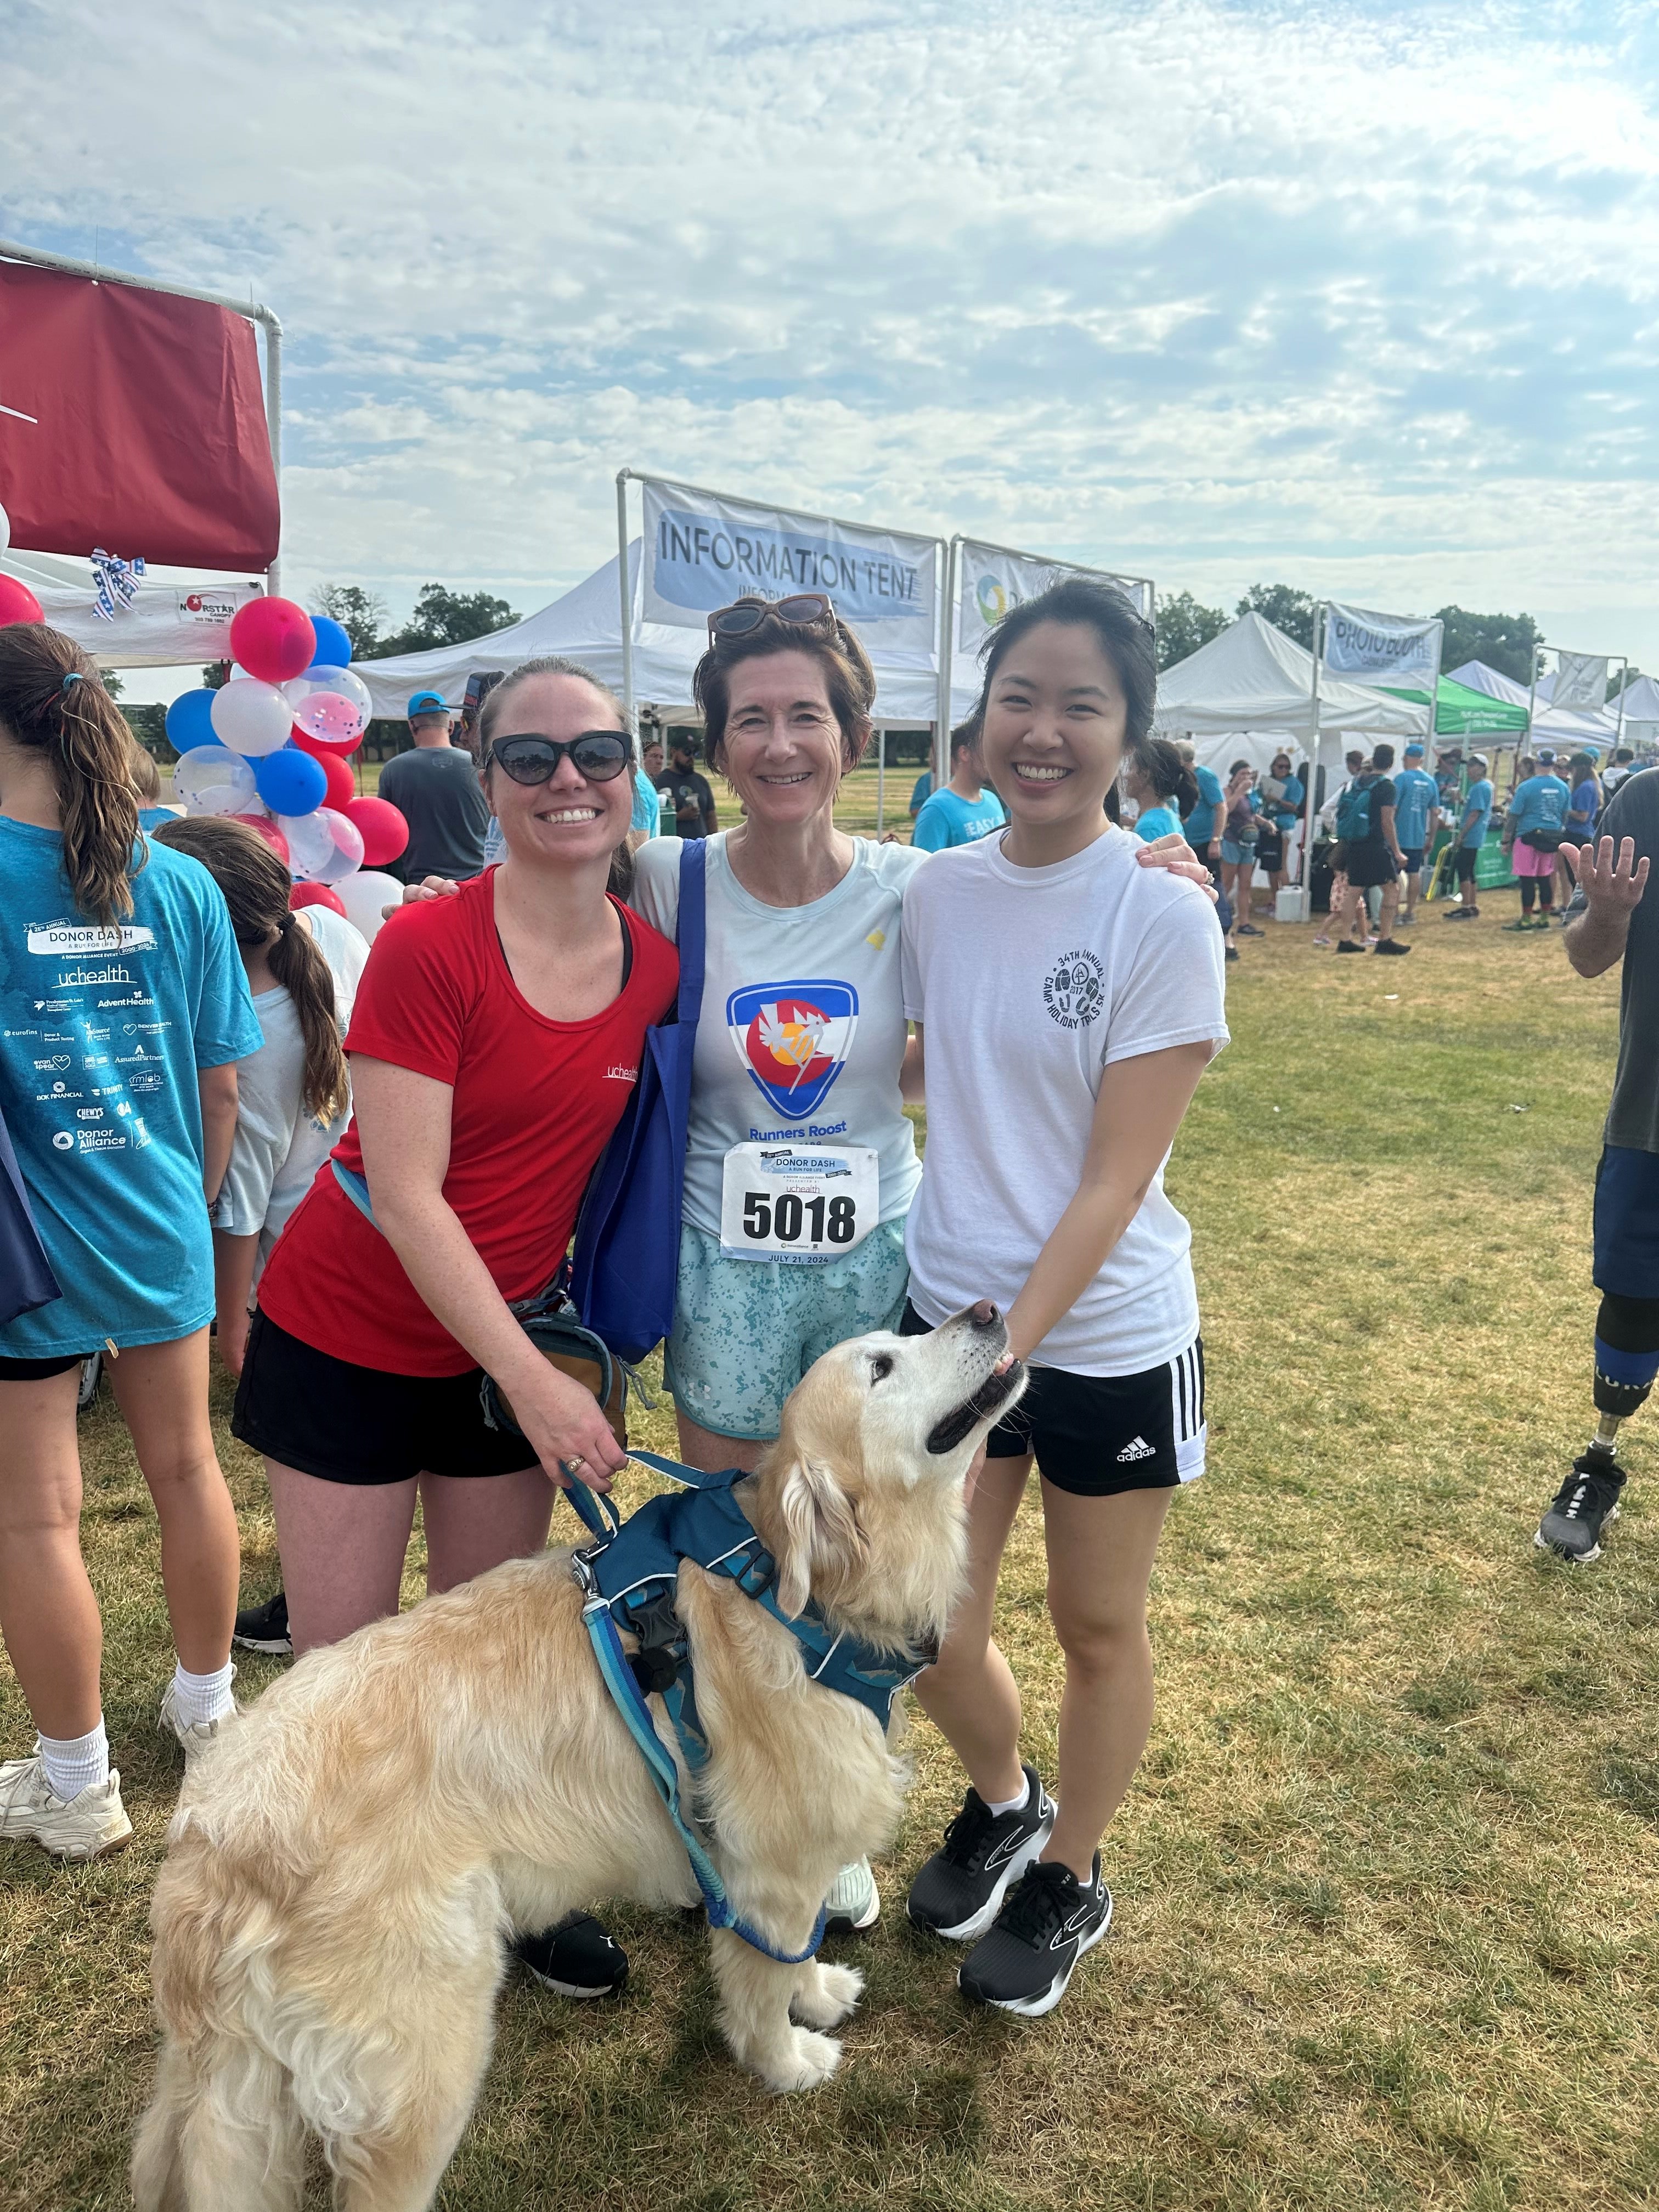 Dr Luu, Dr Zwald, Ali Walker and her dog standing and smiling after the 5k Donor Dash race